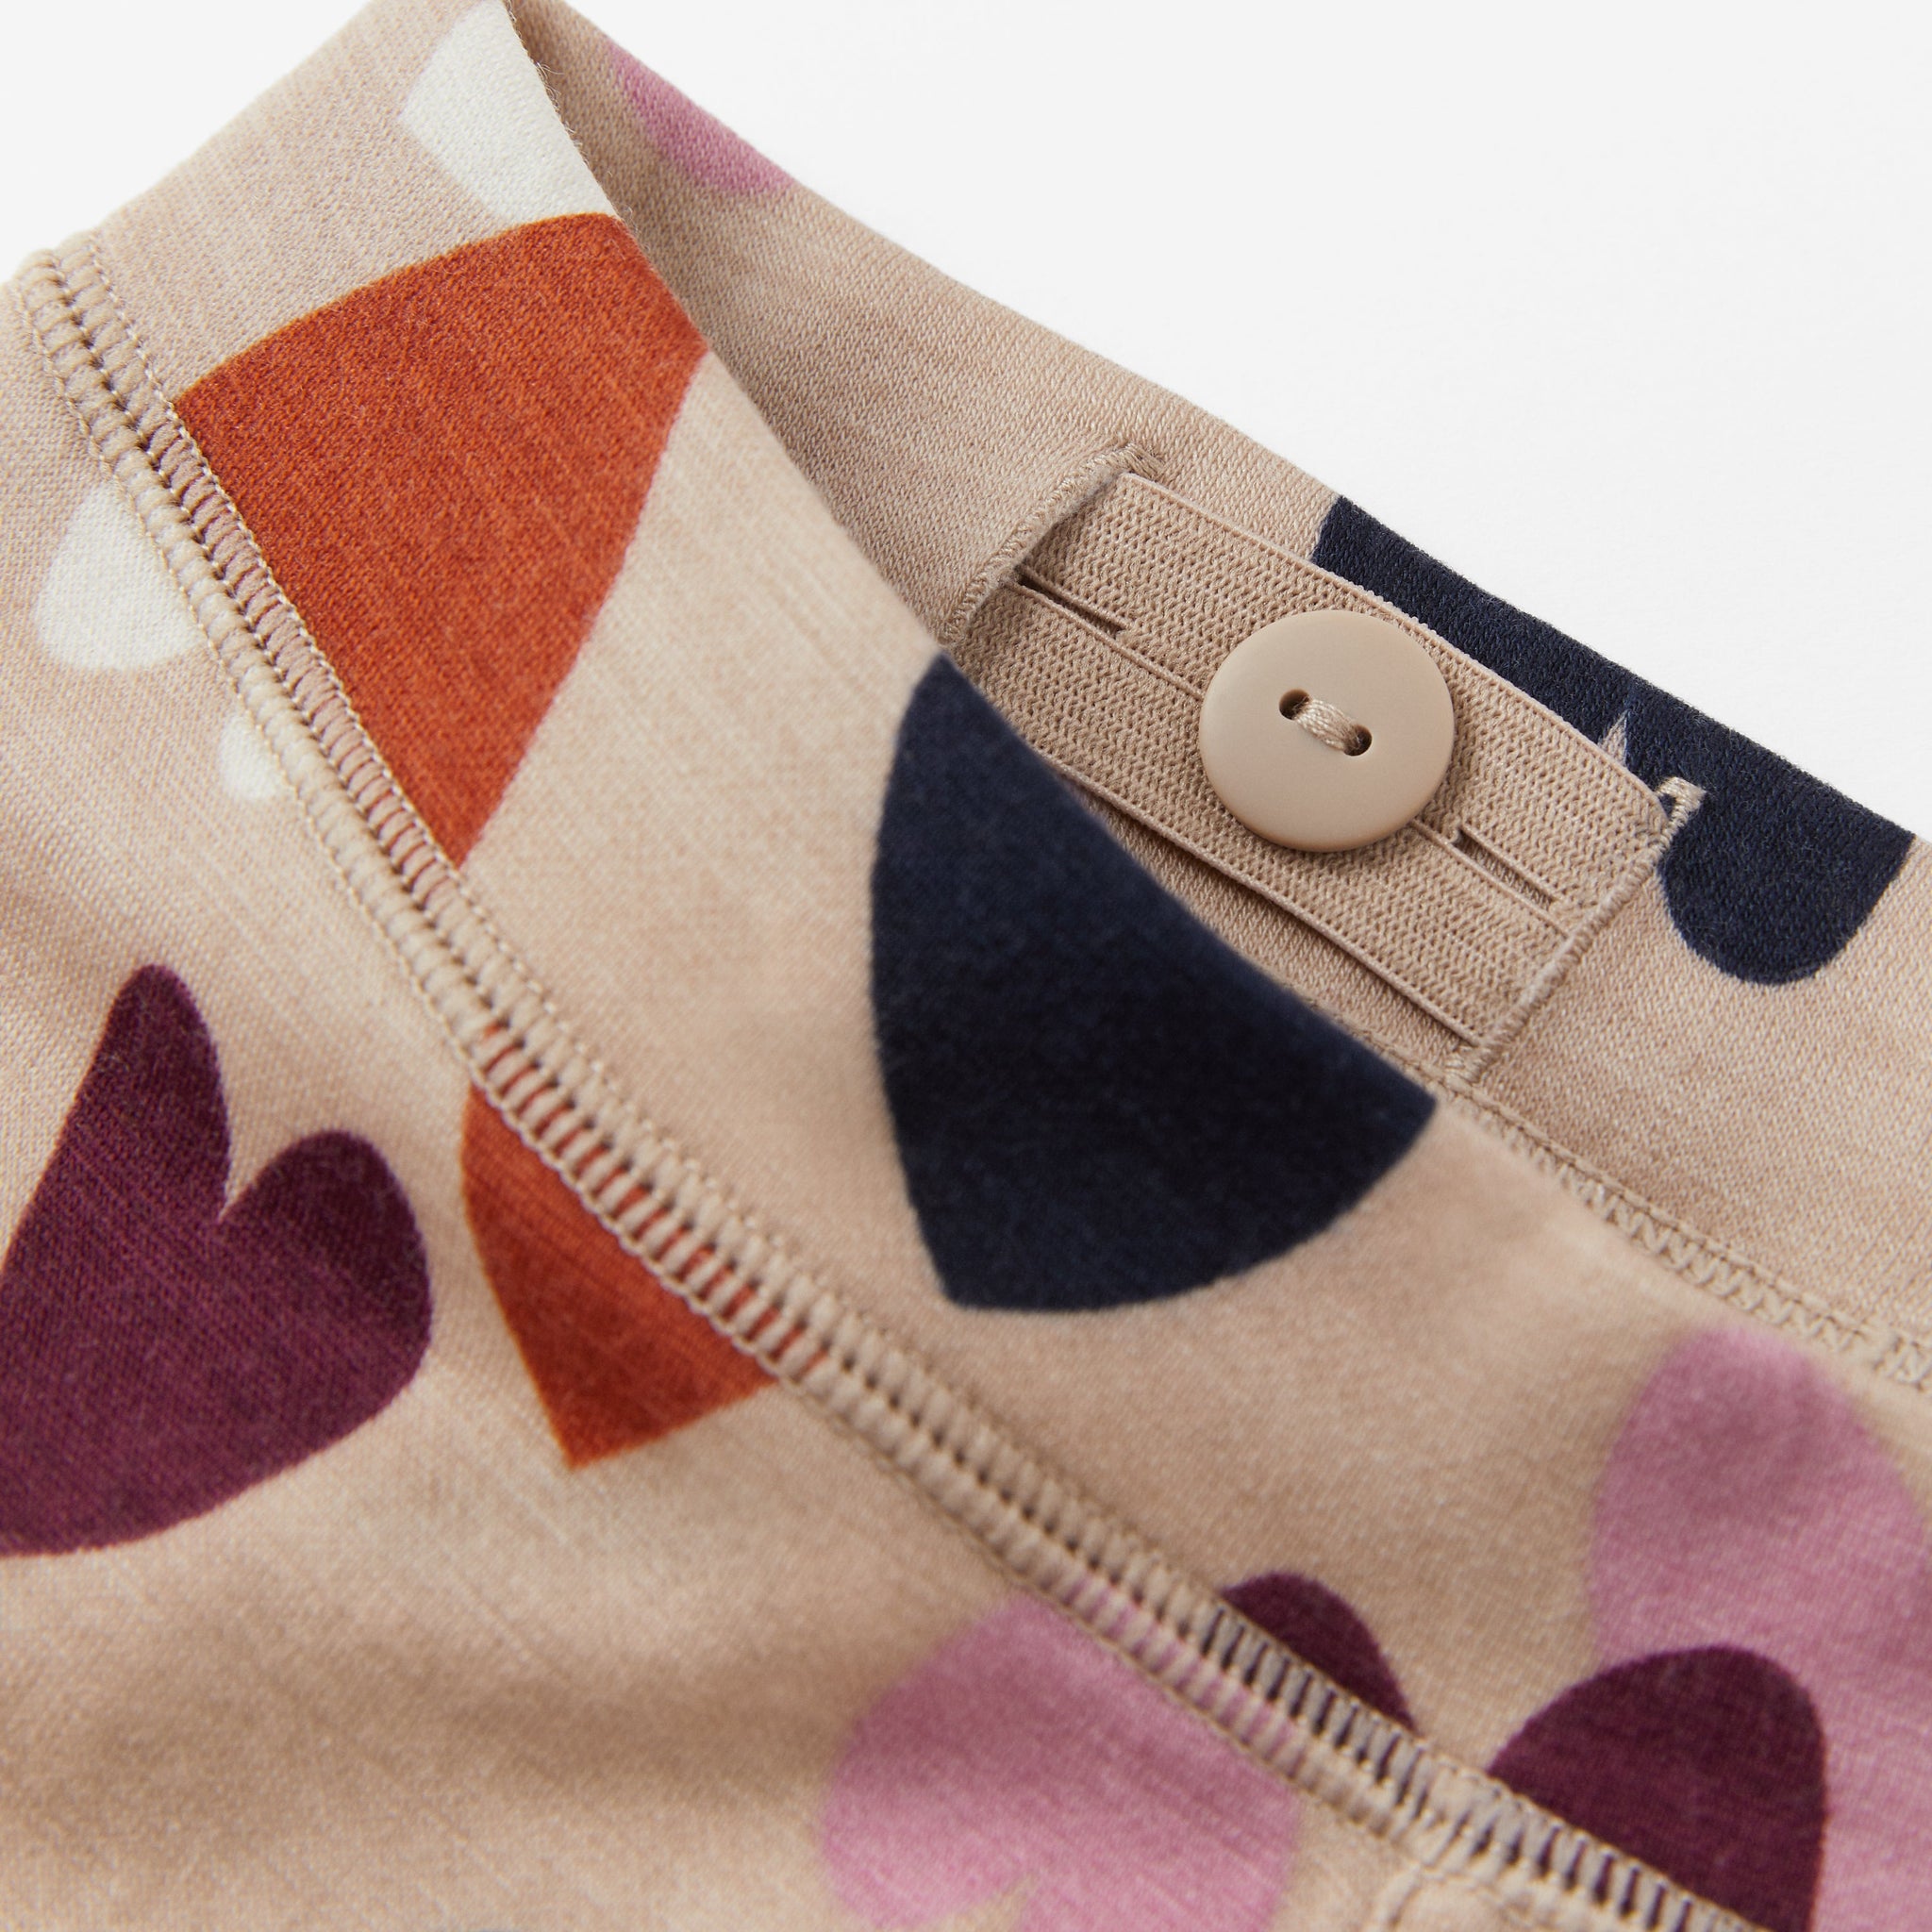 Merino Wool Beige Kids Leggings from the Polarn O. Pyret kidswear collection. Nordic kids clothes made from sustainable sources.